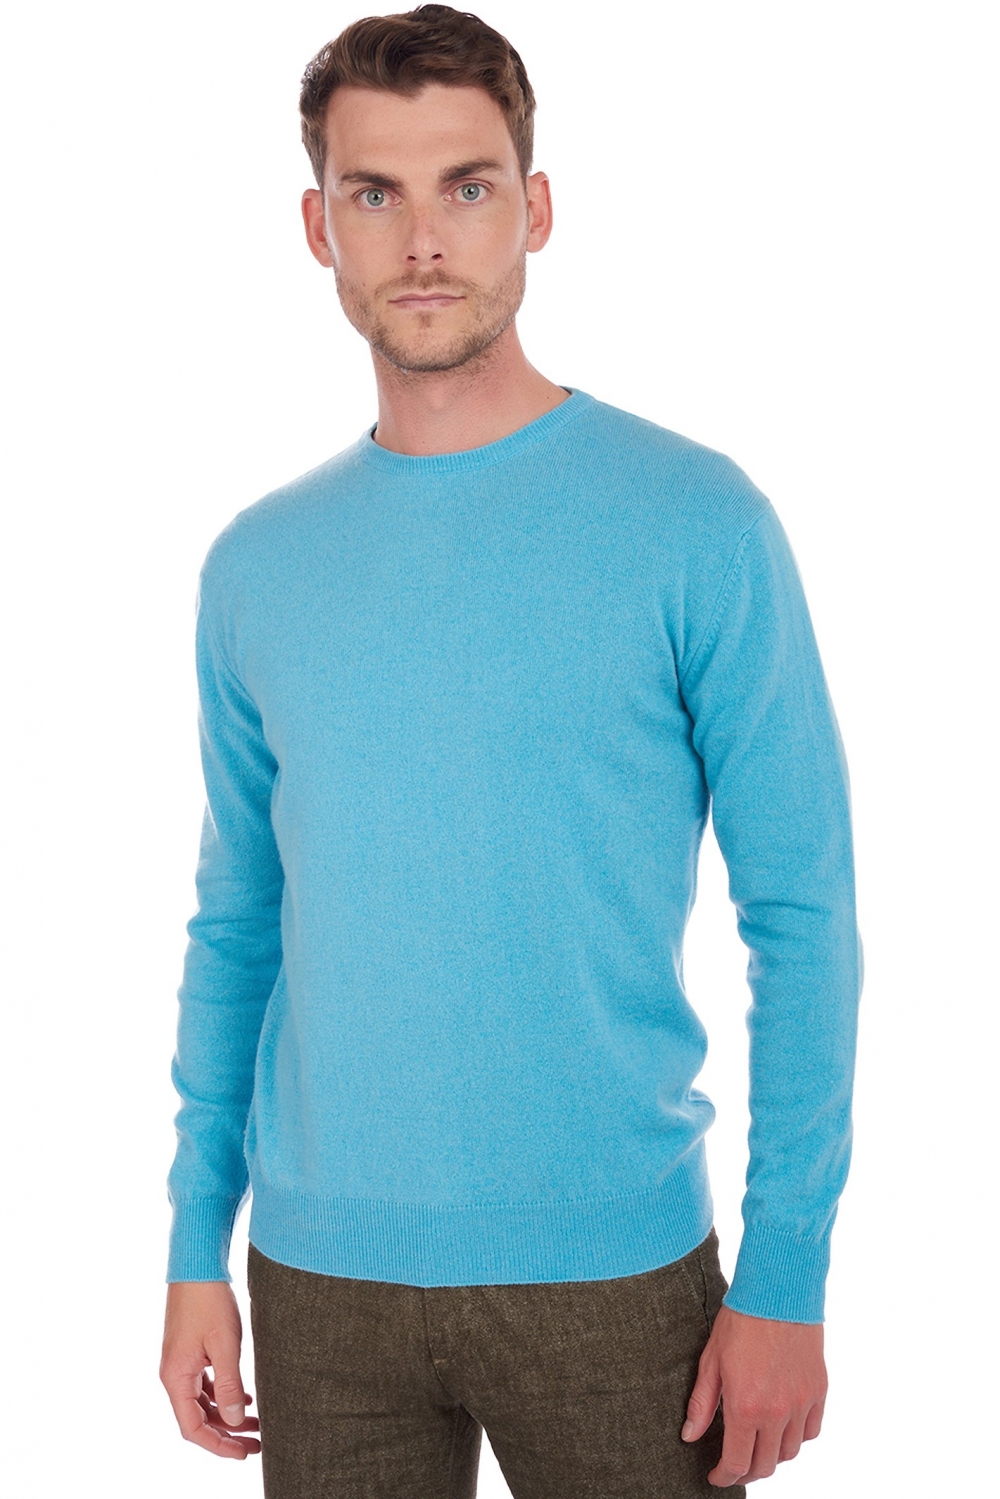 Cachemire pull homme col rond keaton tourmaline 2xl